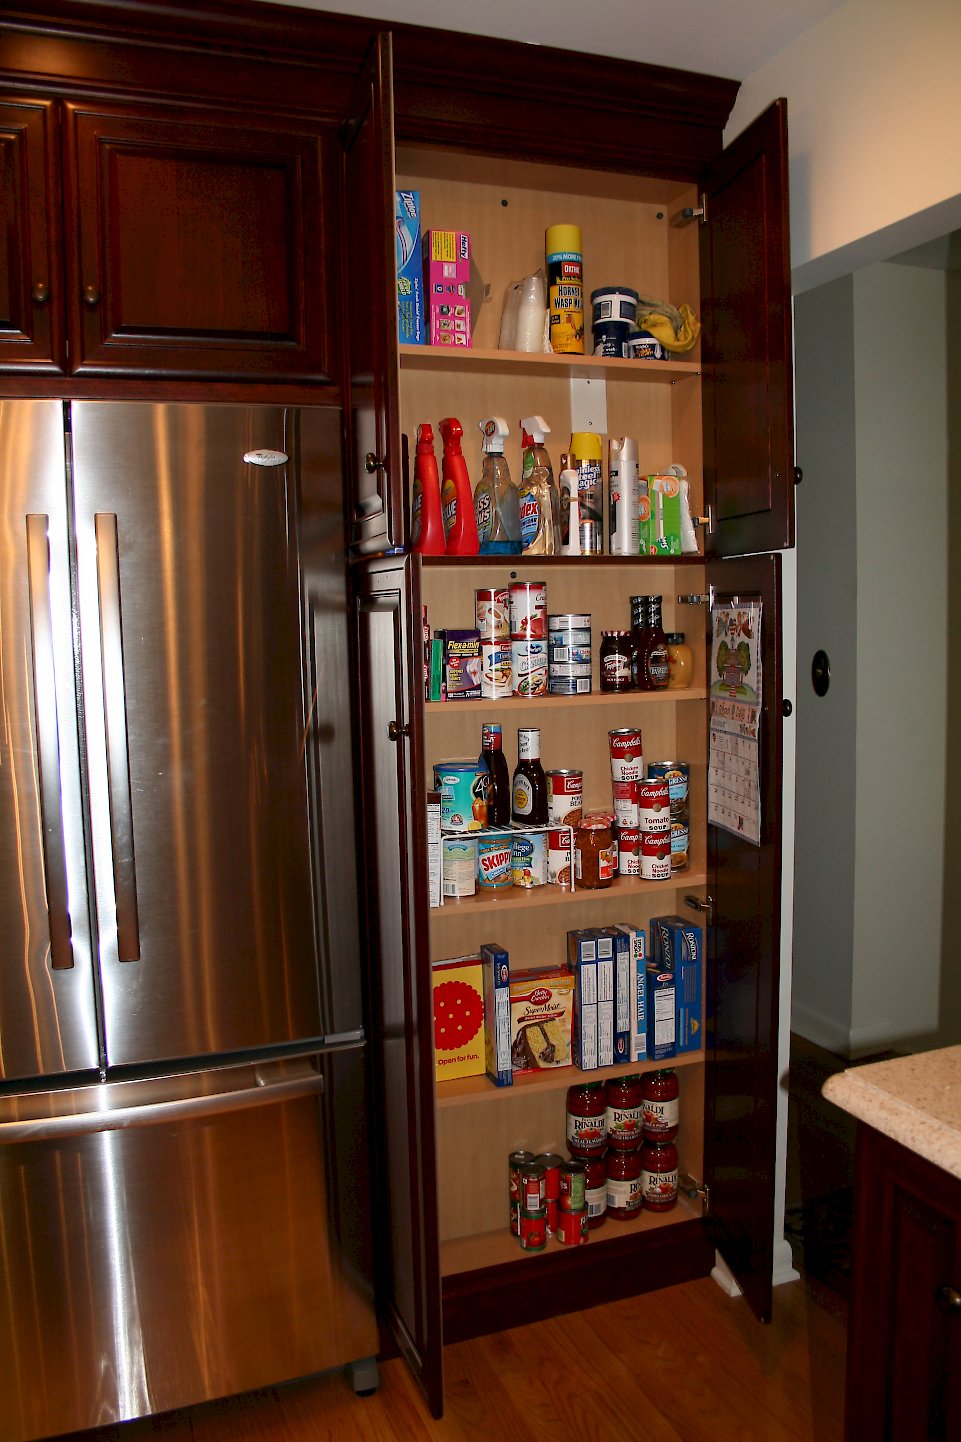 The tall pantry cabinet.